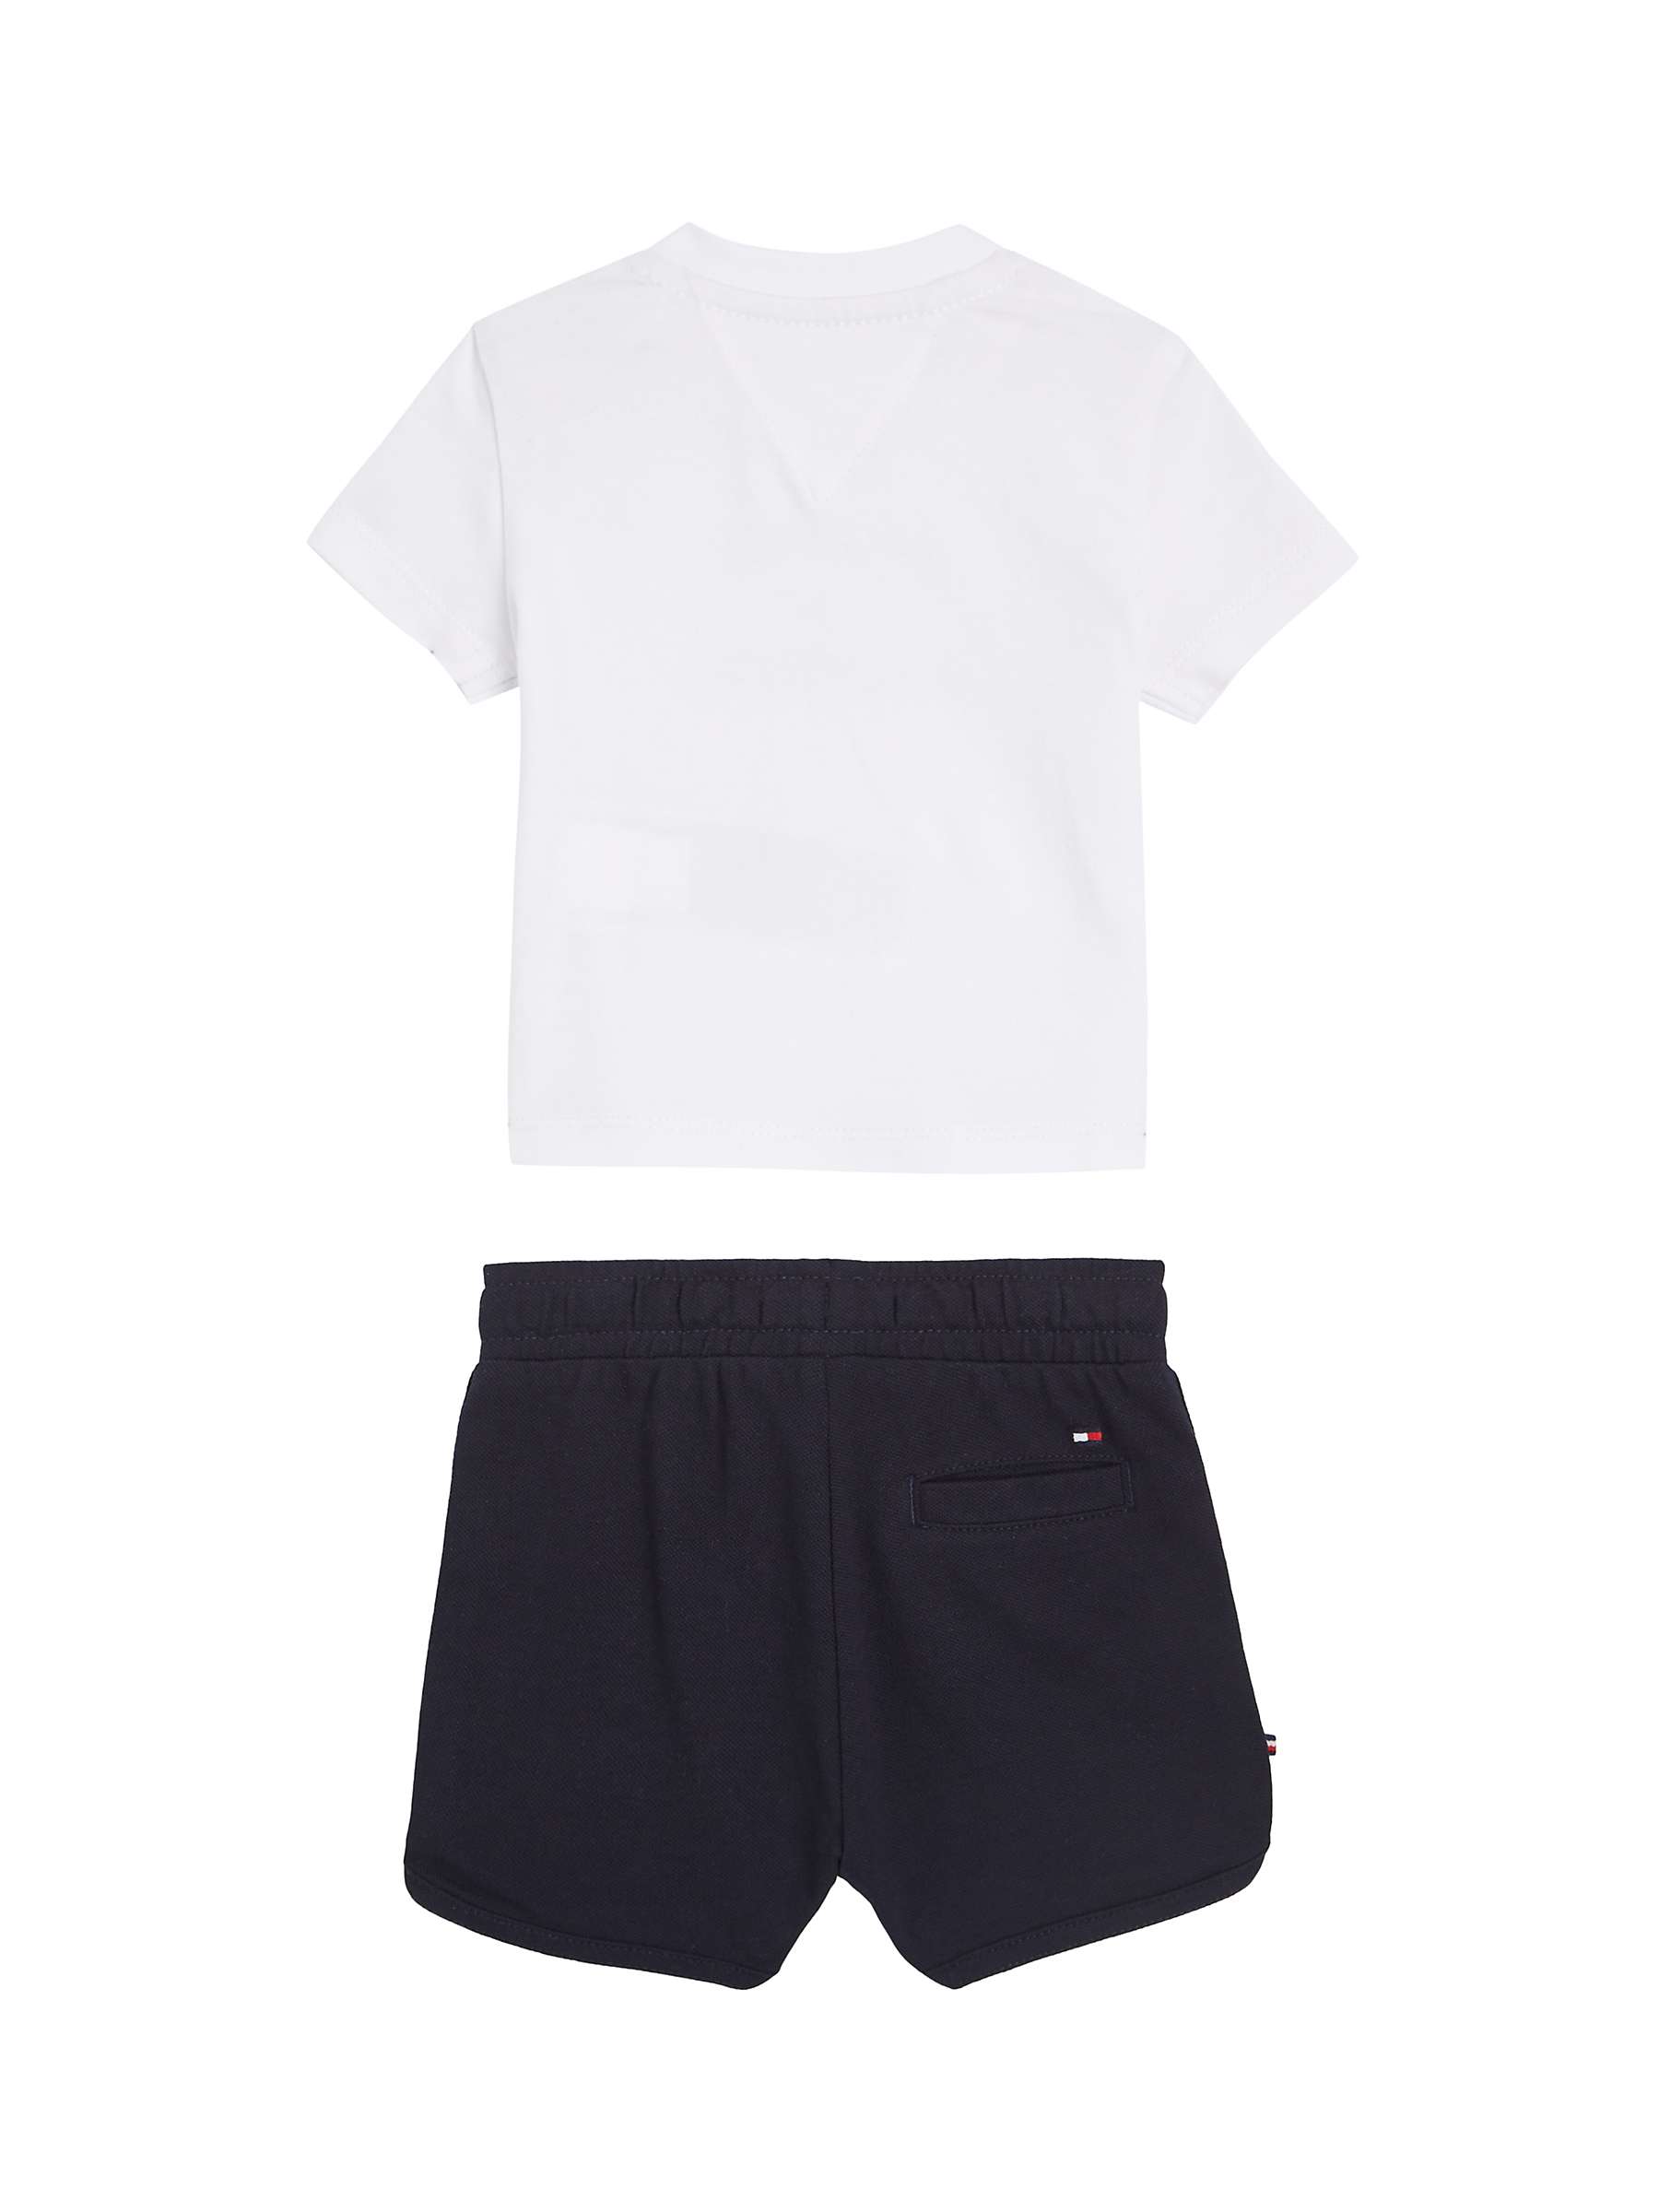 Buy Tommy Hilfiger Baby Logo Short and T-Shirt Set, White/Navy Online at johnlewis.com